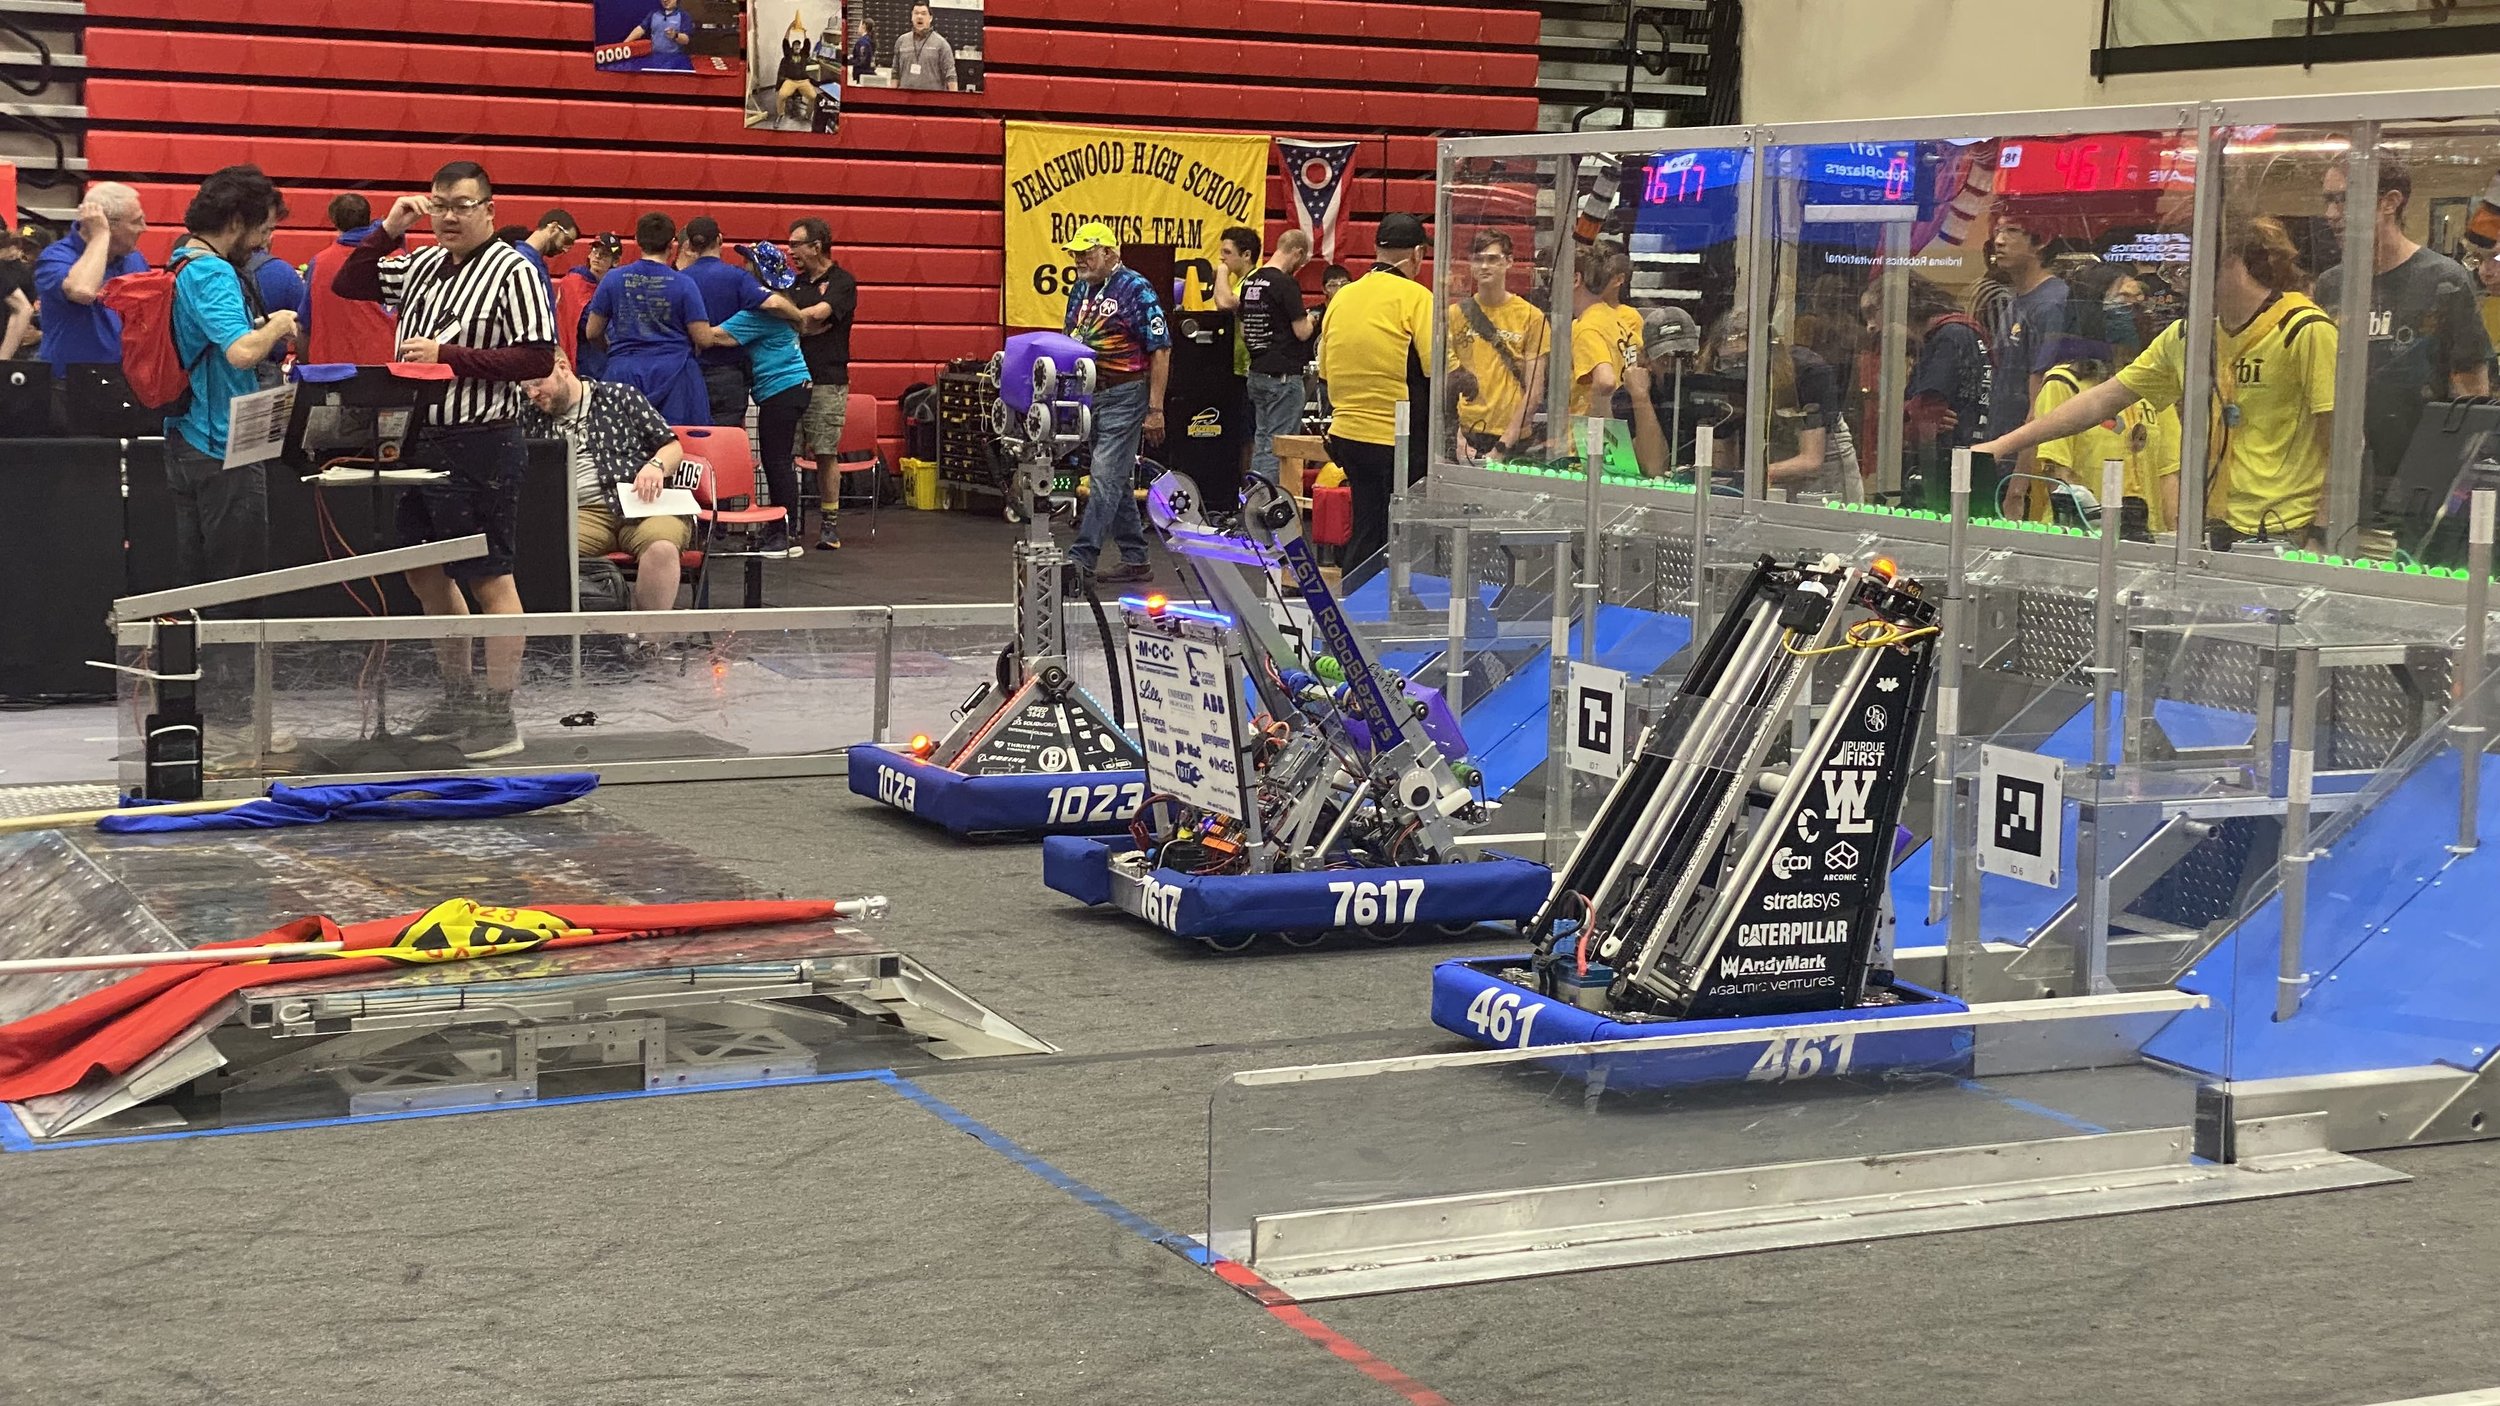  Bedford Express and their alliance during a match at IRI 